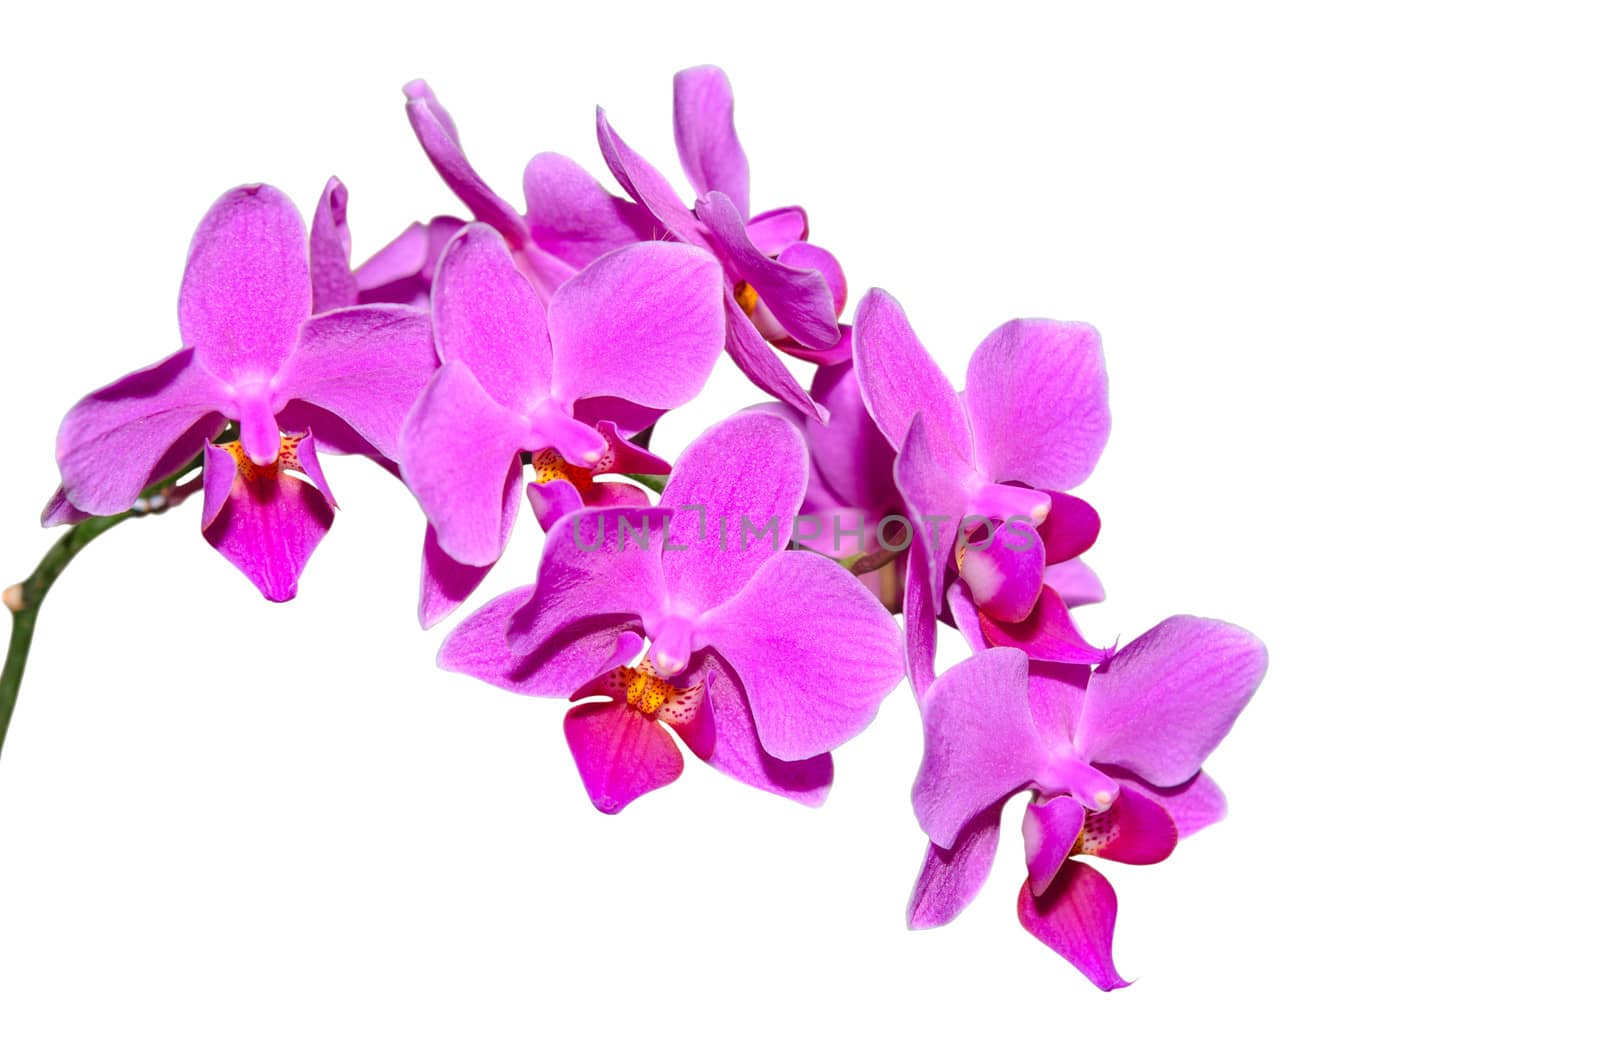 Elegant branch of exotic flowers with purple petals isolate